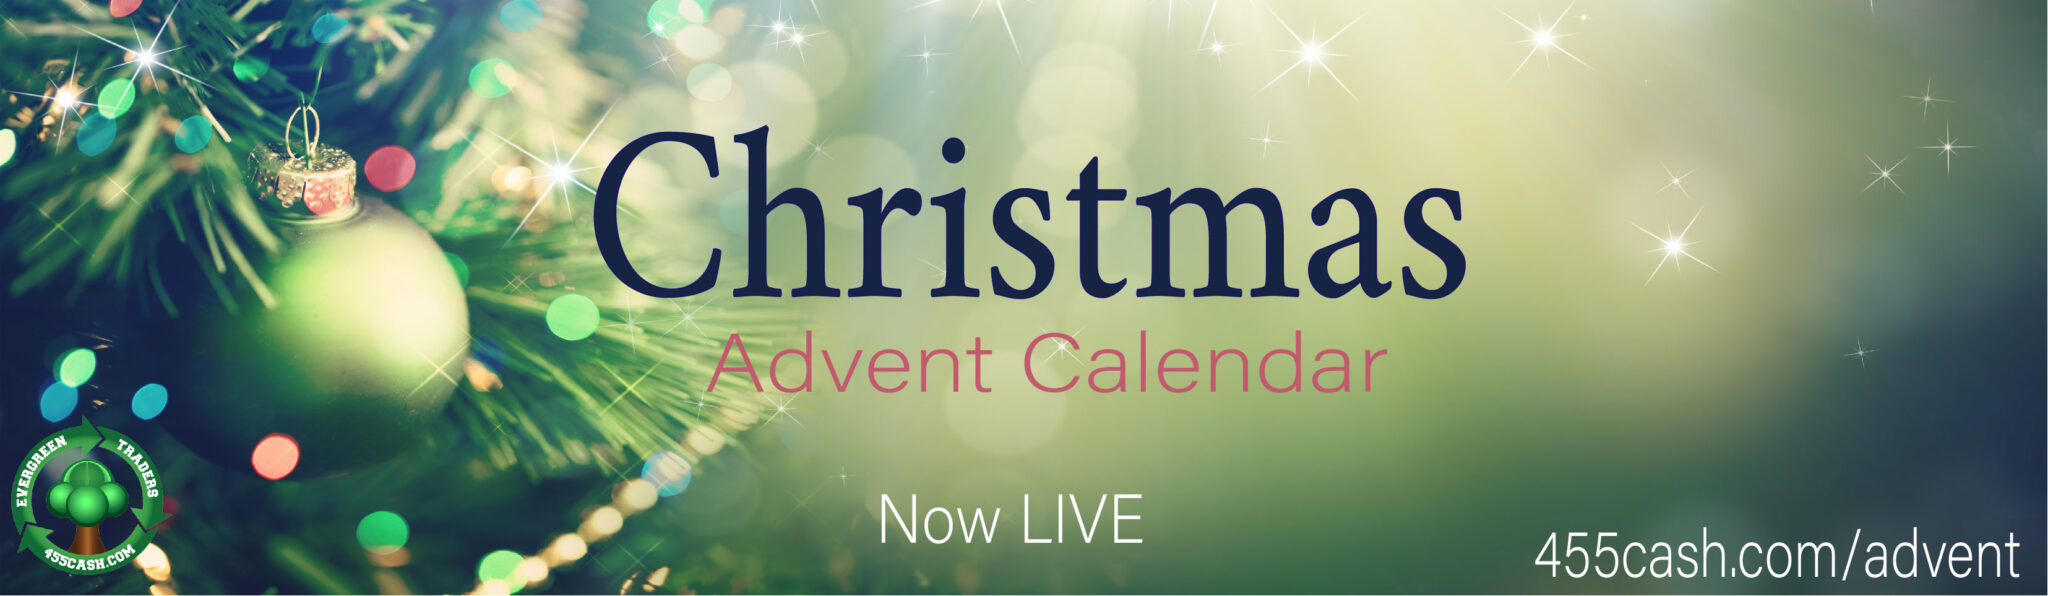 Our Christmas Advent Calendar is now LIVE!